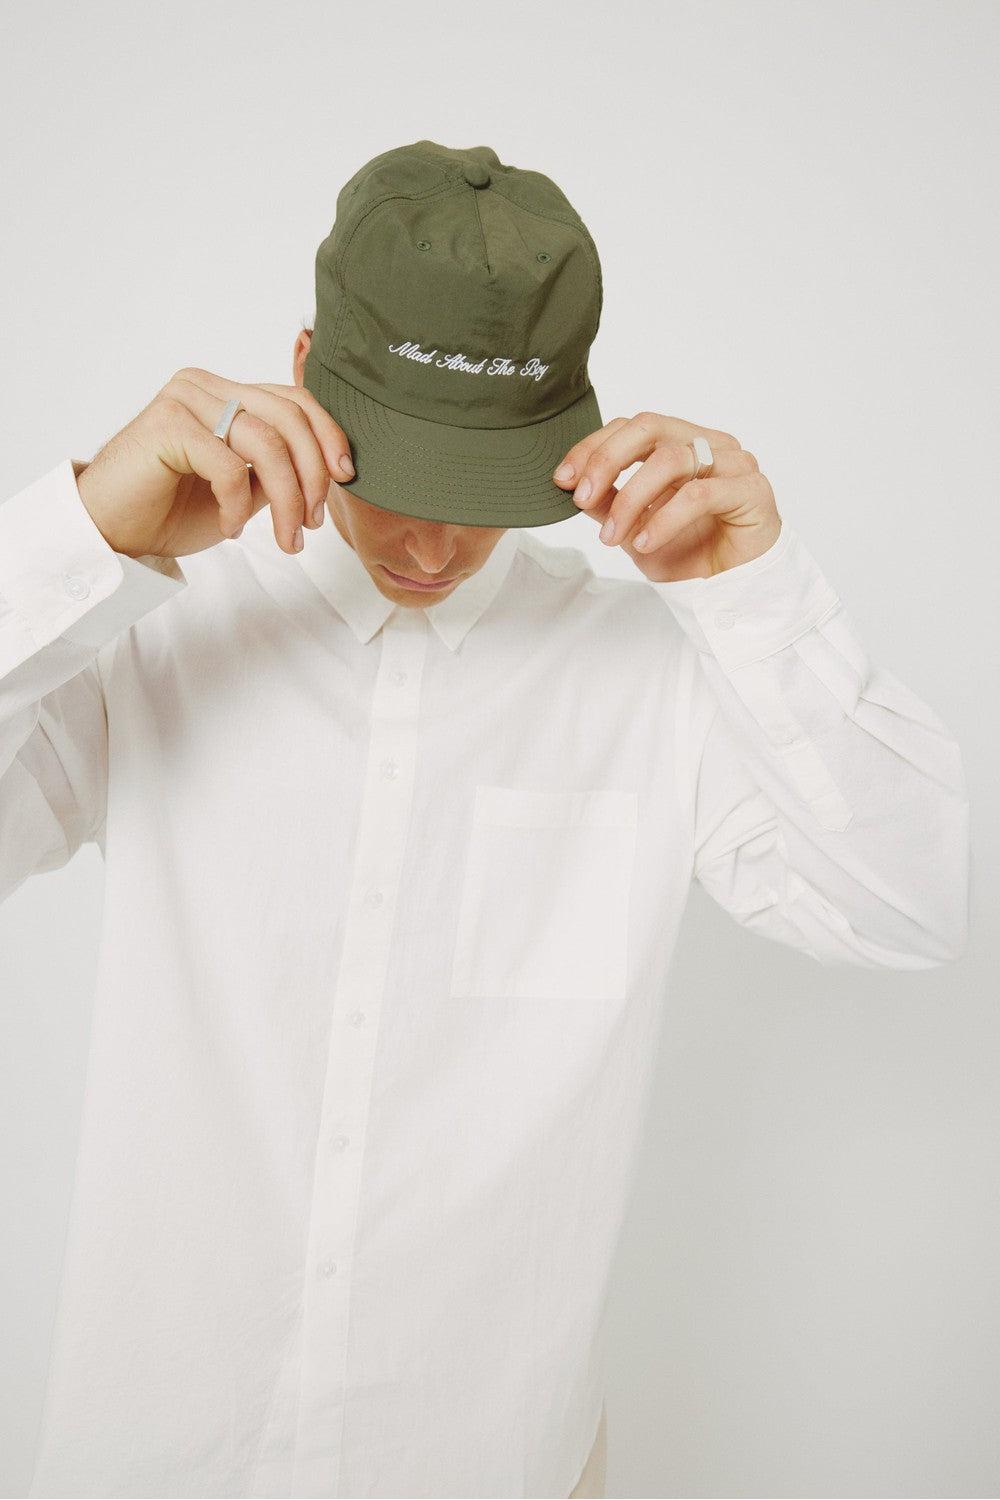 SCRIPT LOGO CAP / ARMY | Mad About The Boy | Mad About The Boy